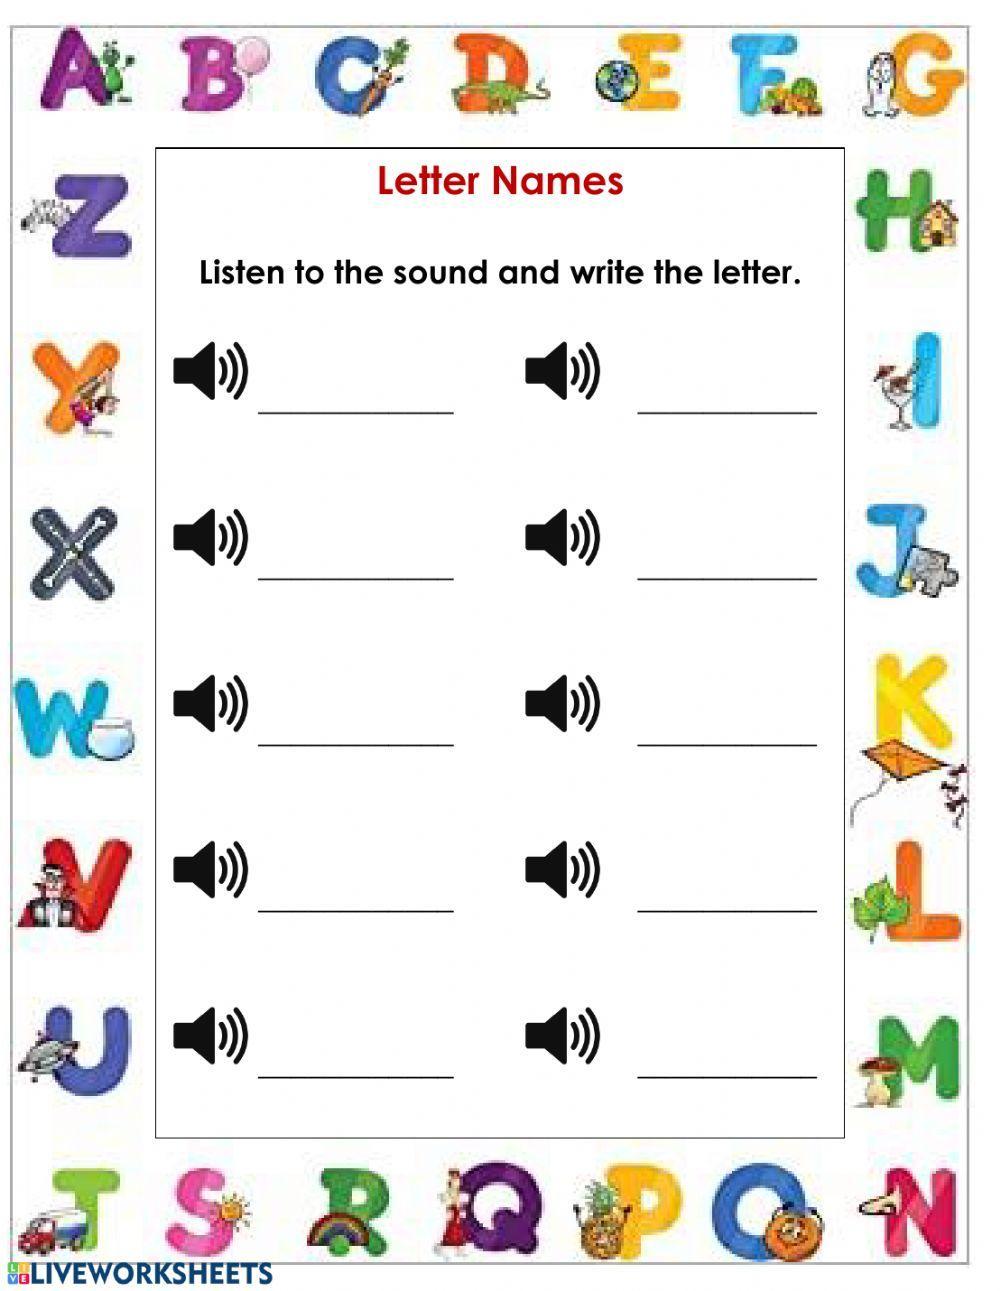 Listen and write the letter.